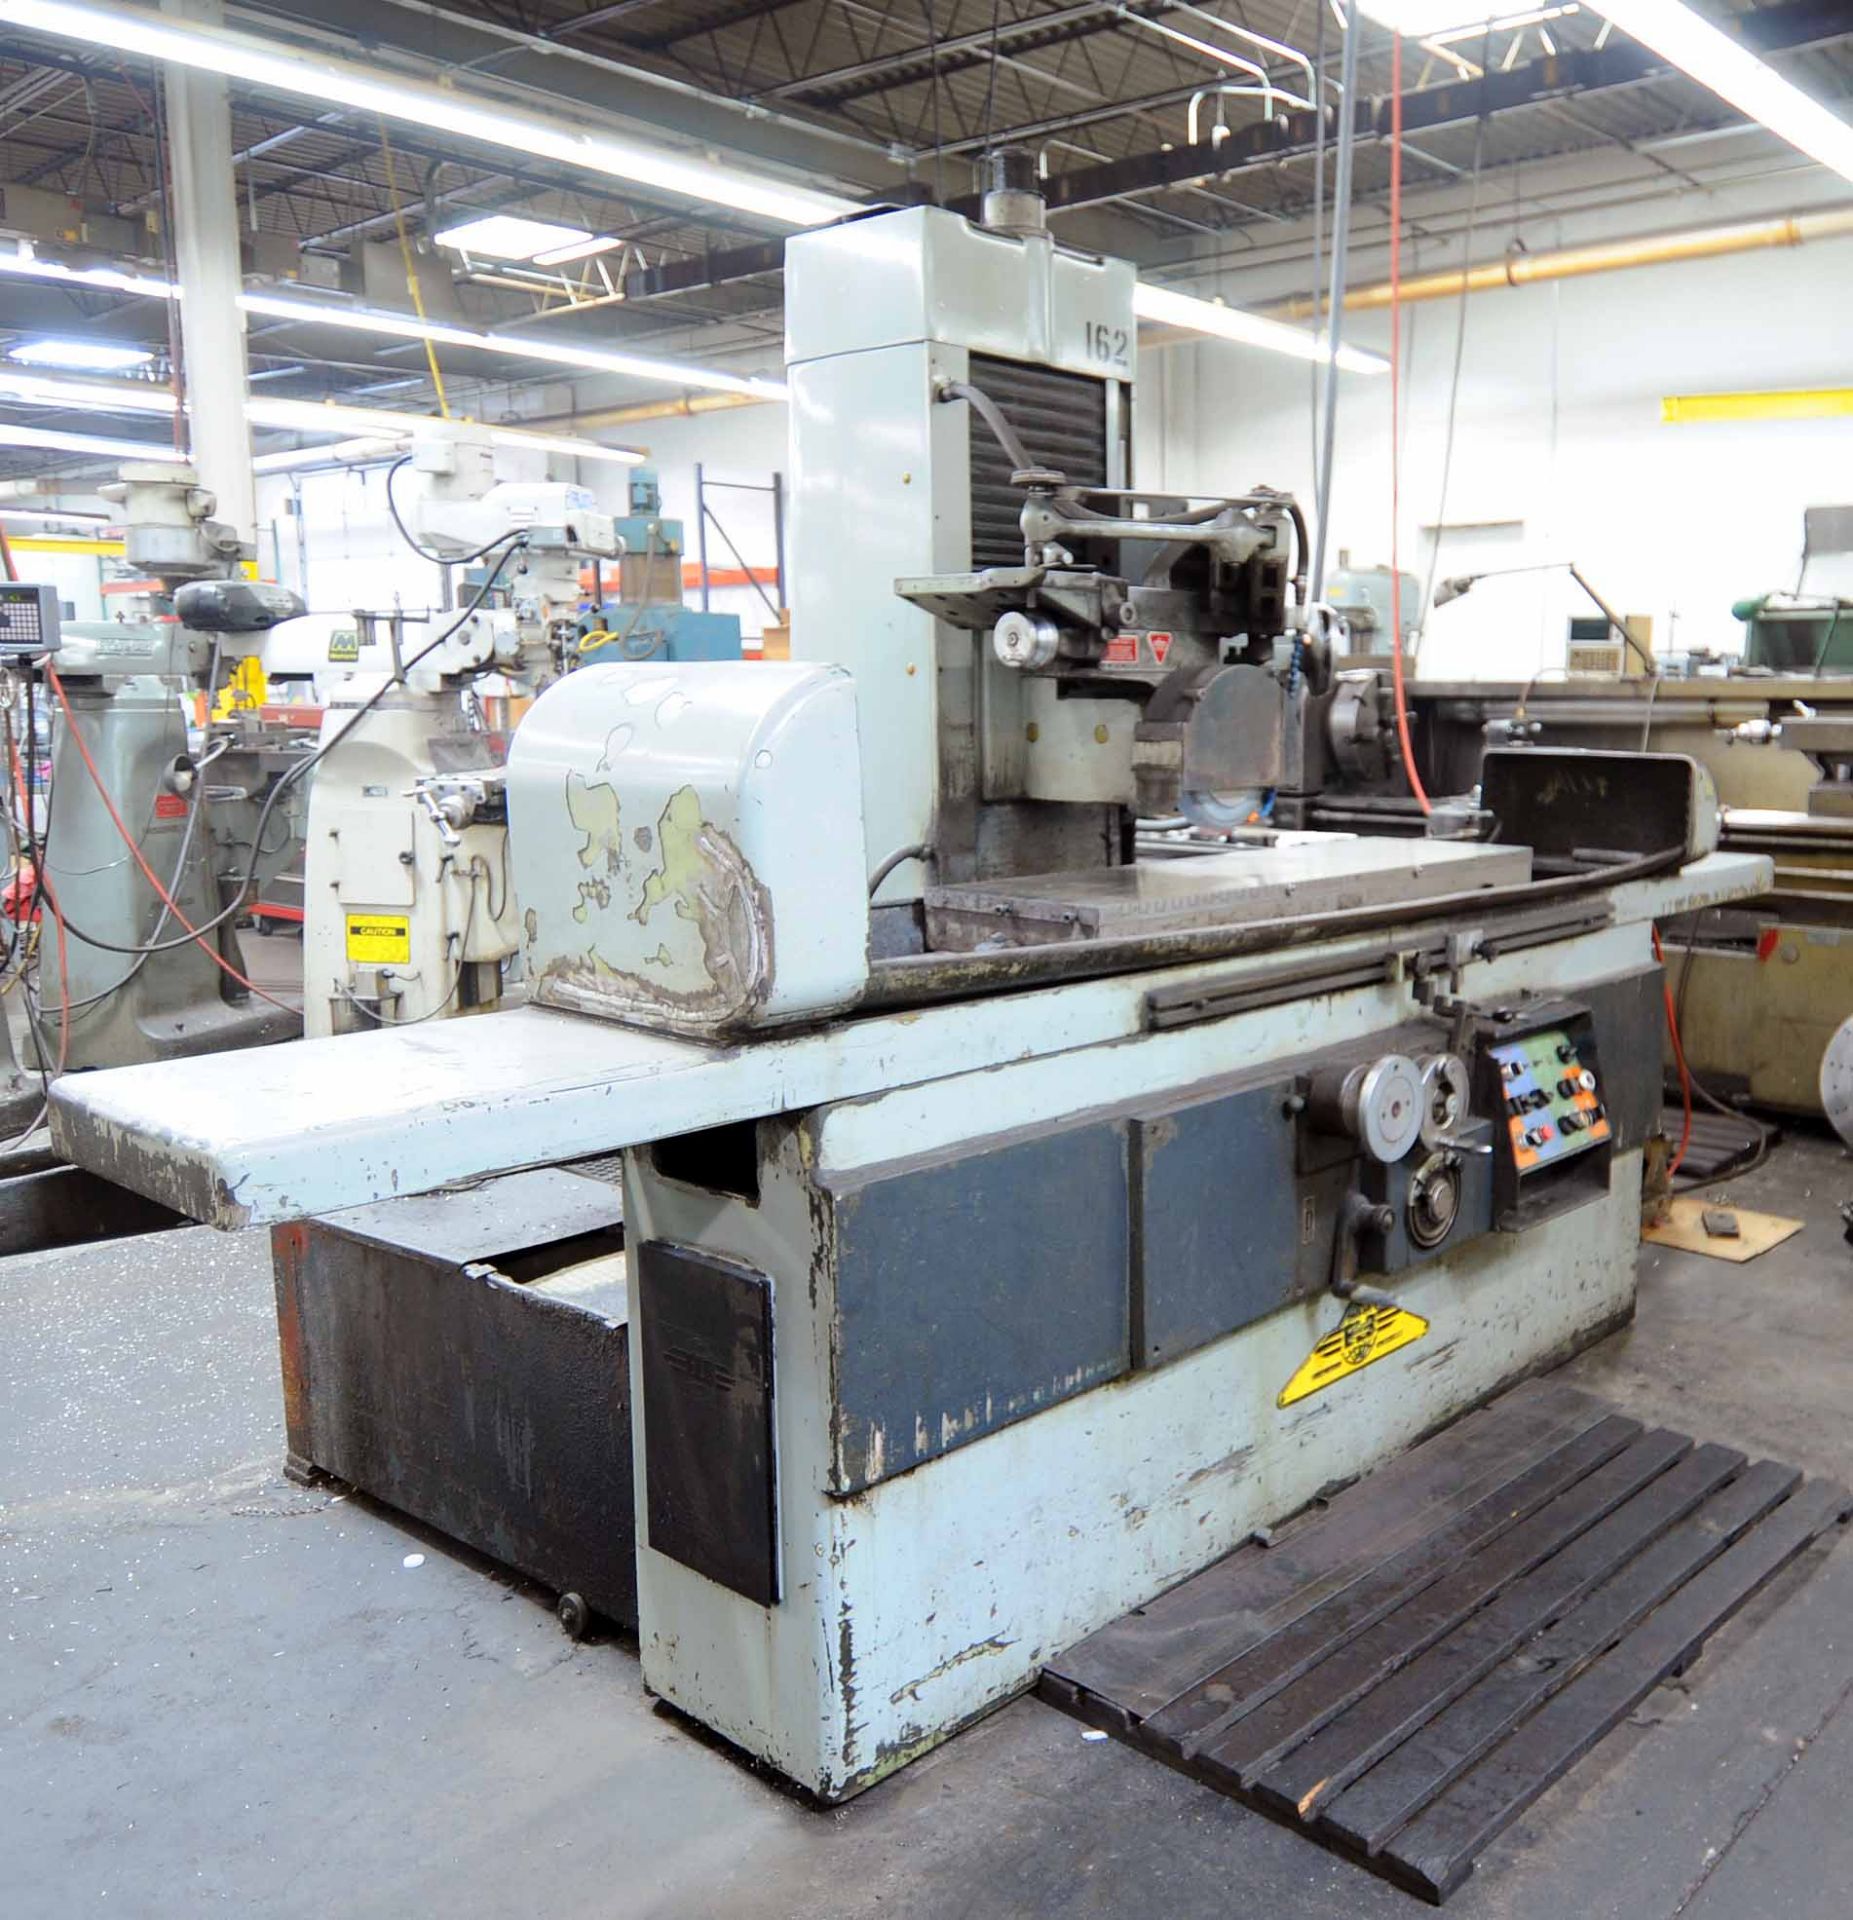 AUTOMATIC HYDRAULIC SURFACE GRINDER, ELB 14" X 48", Type SW12VAI-Z, 14" x 48" electromagnetic chuck,